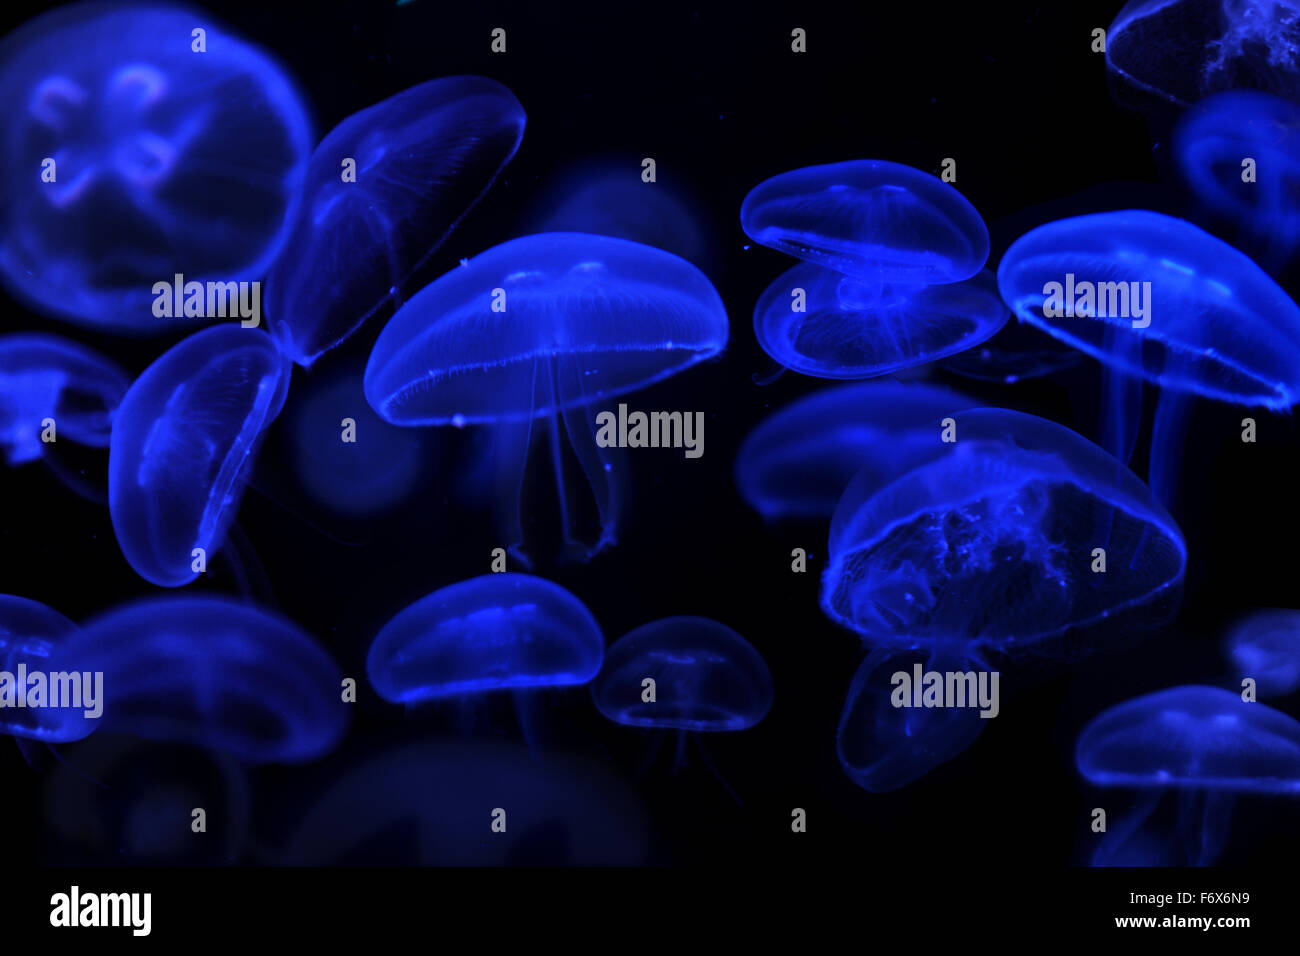 School of moon jellyfish against black background Stock Photo